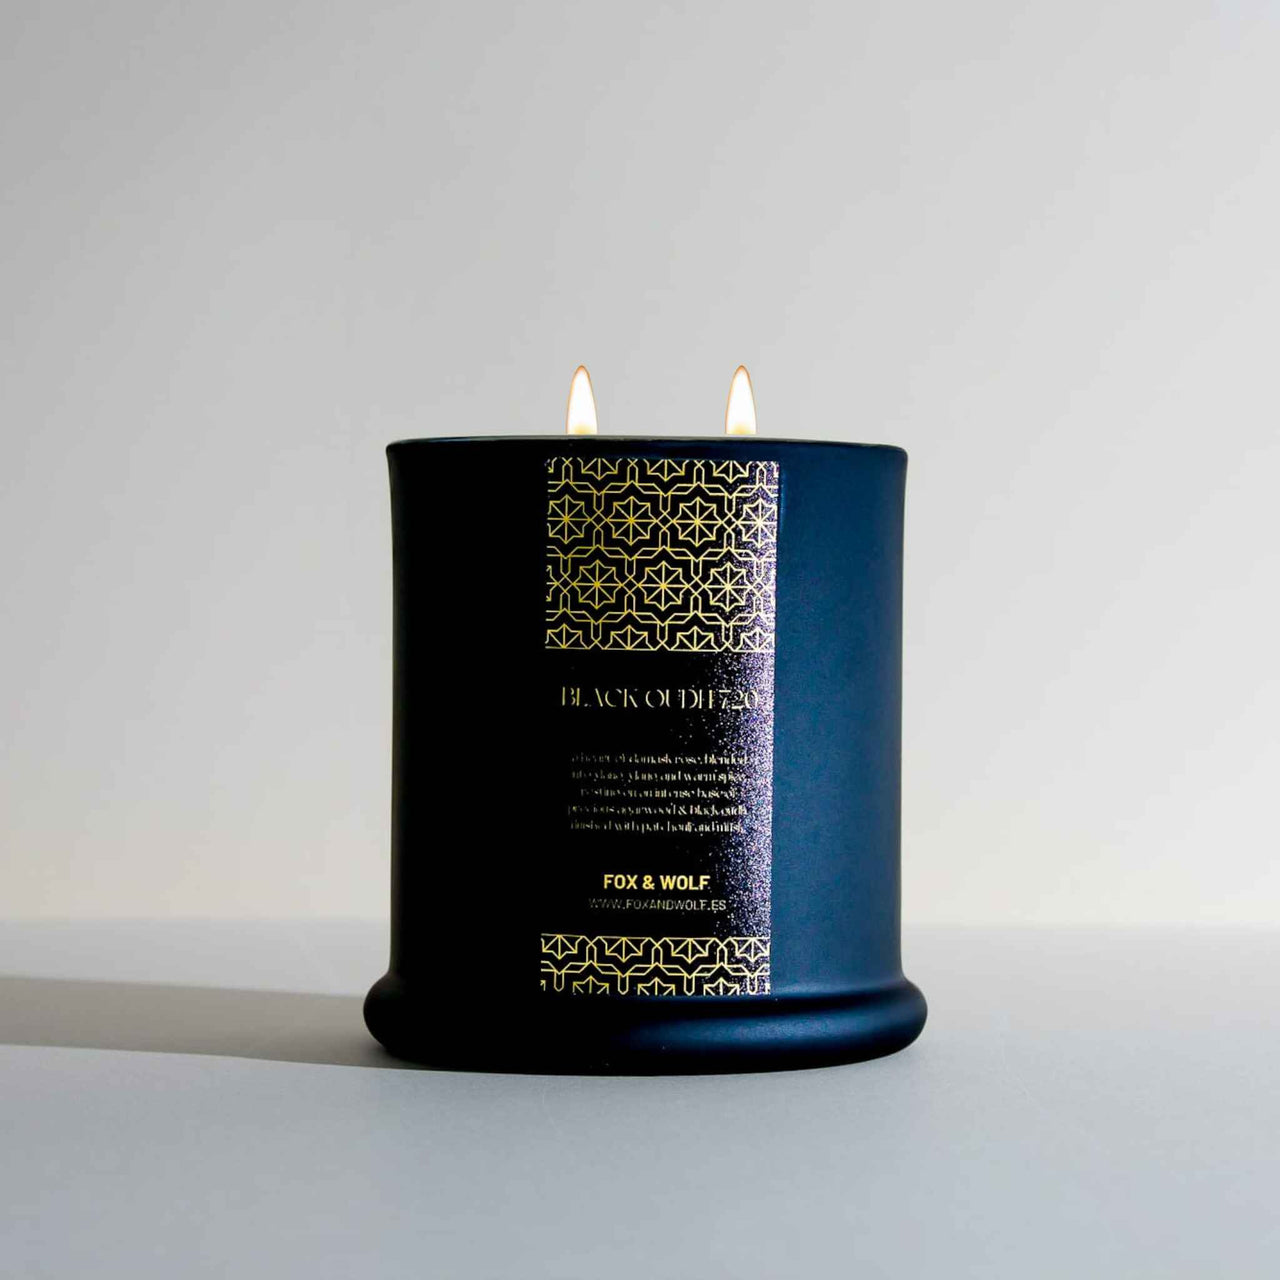 500G BLACK OUDH 720 SCENTED CANDLE